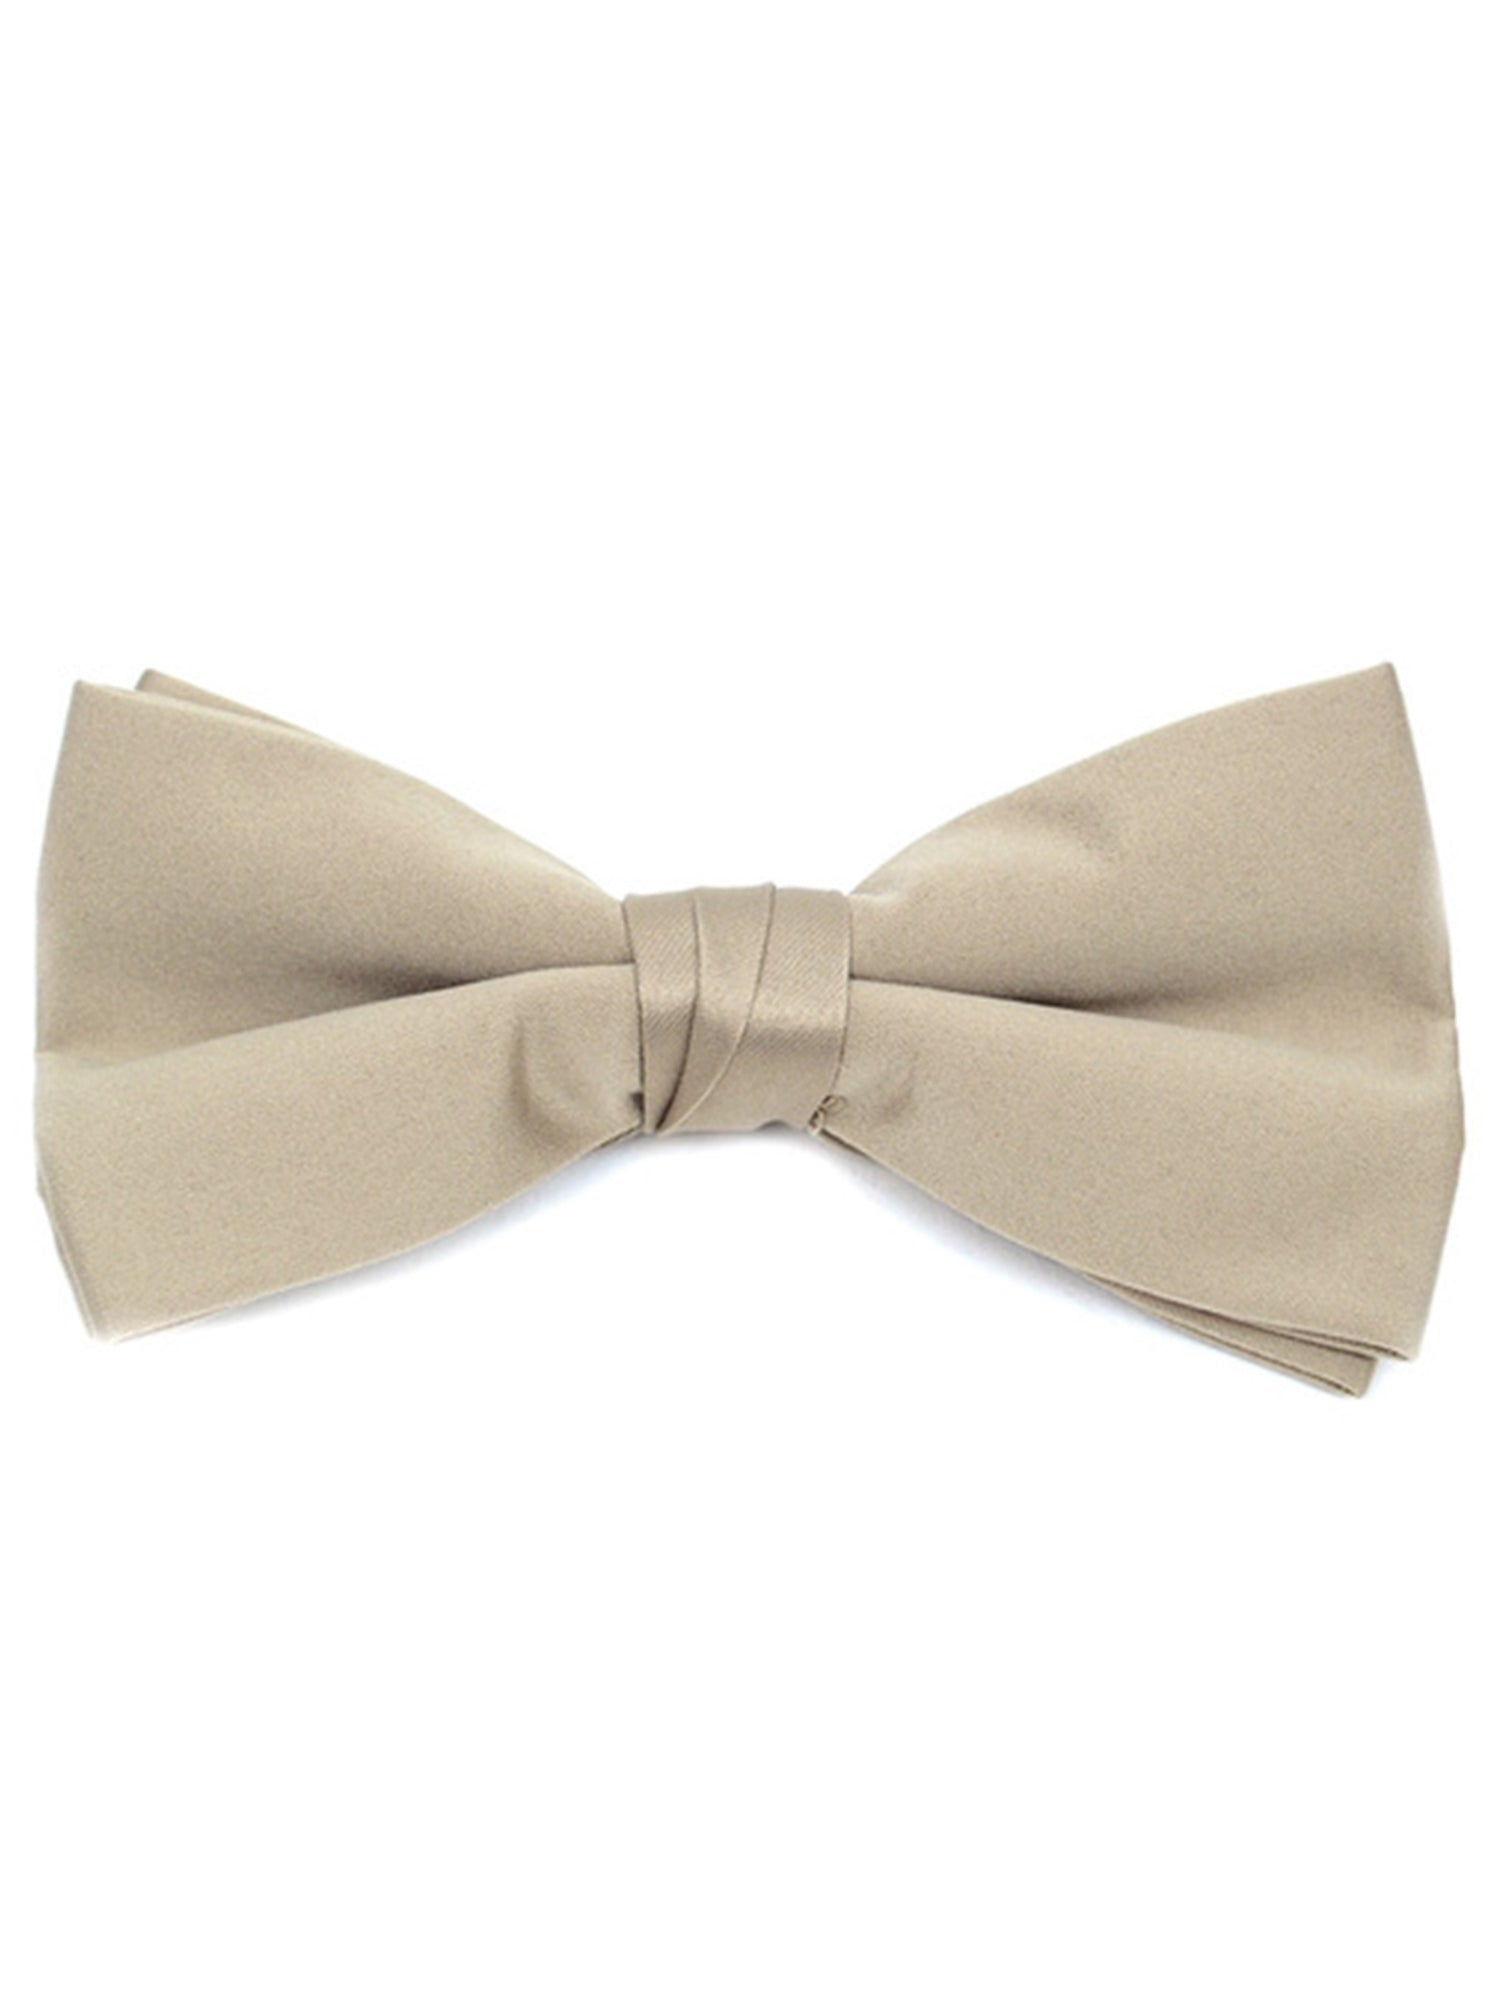 Men's Pre-tied Clip On Bow Tie - Formal Tuxedo Solid Color Men's Solid Color Bow Tie TheDapperTie Taupe One Size 